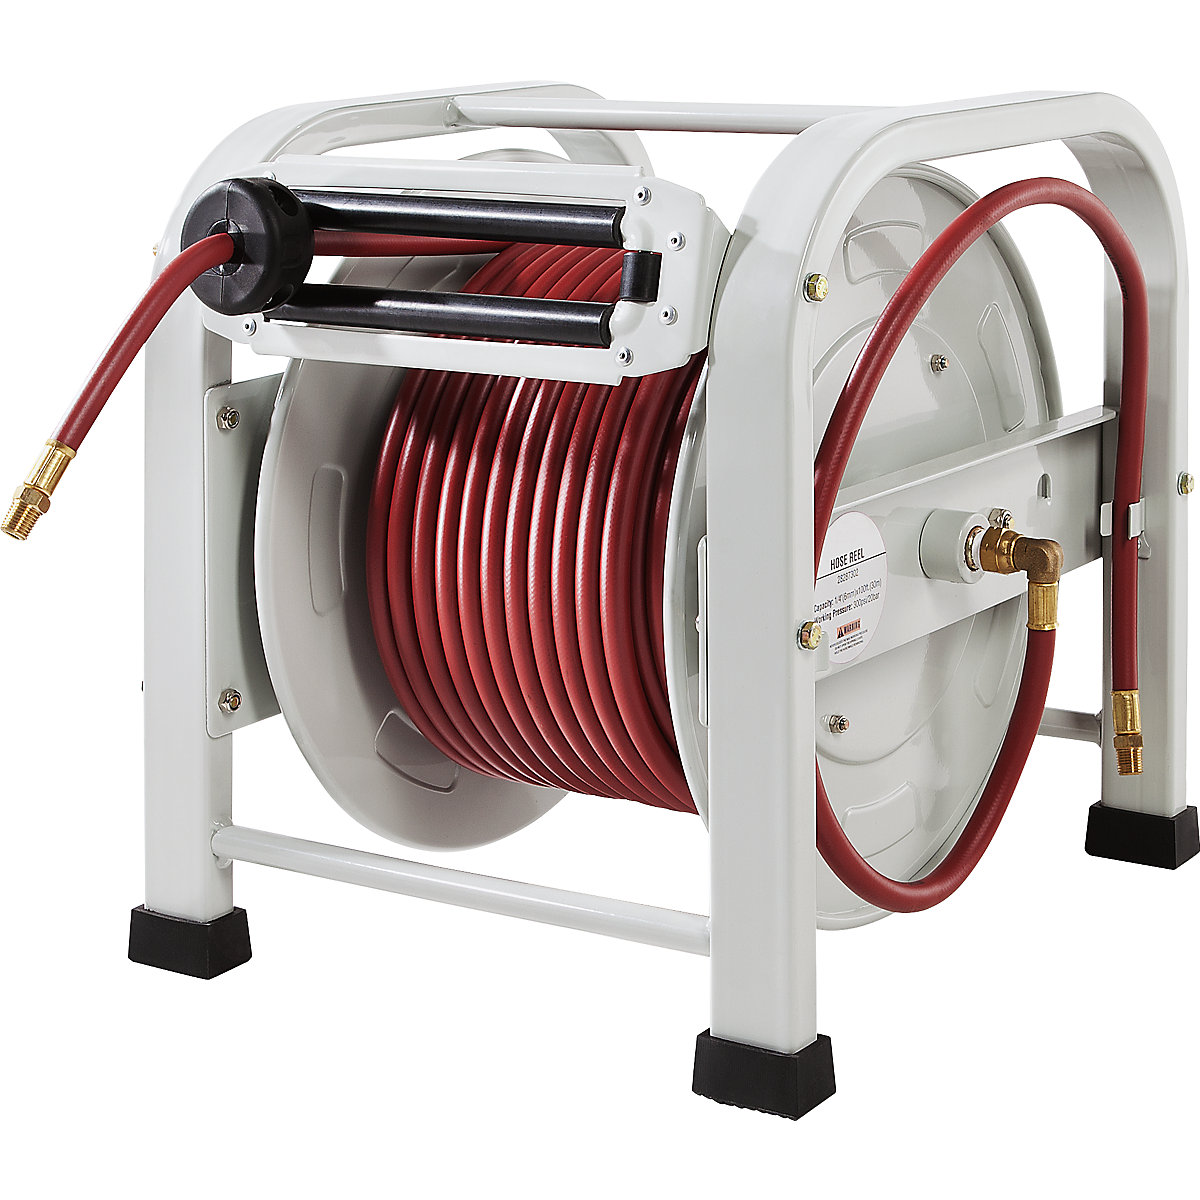 UK Made Thru Feed Hose Reel without Hose Holds up to 30 metre Hose X8180